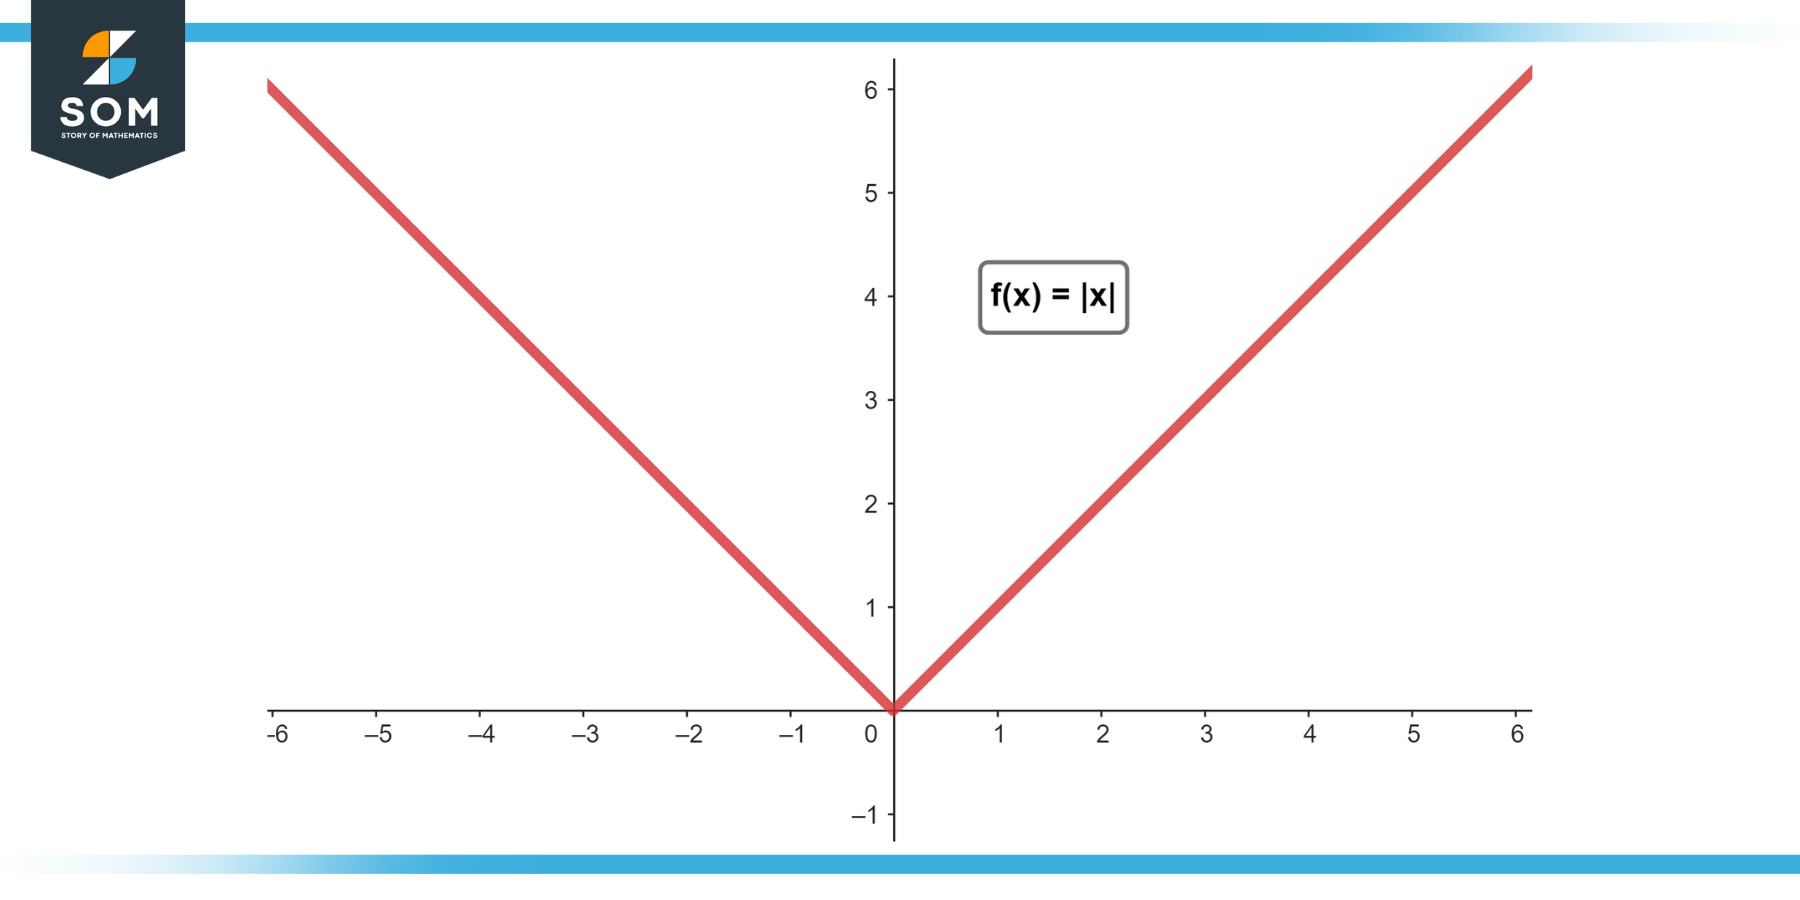 Generic representation of the function fx equals